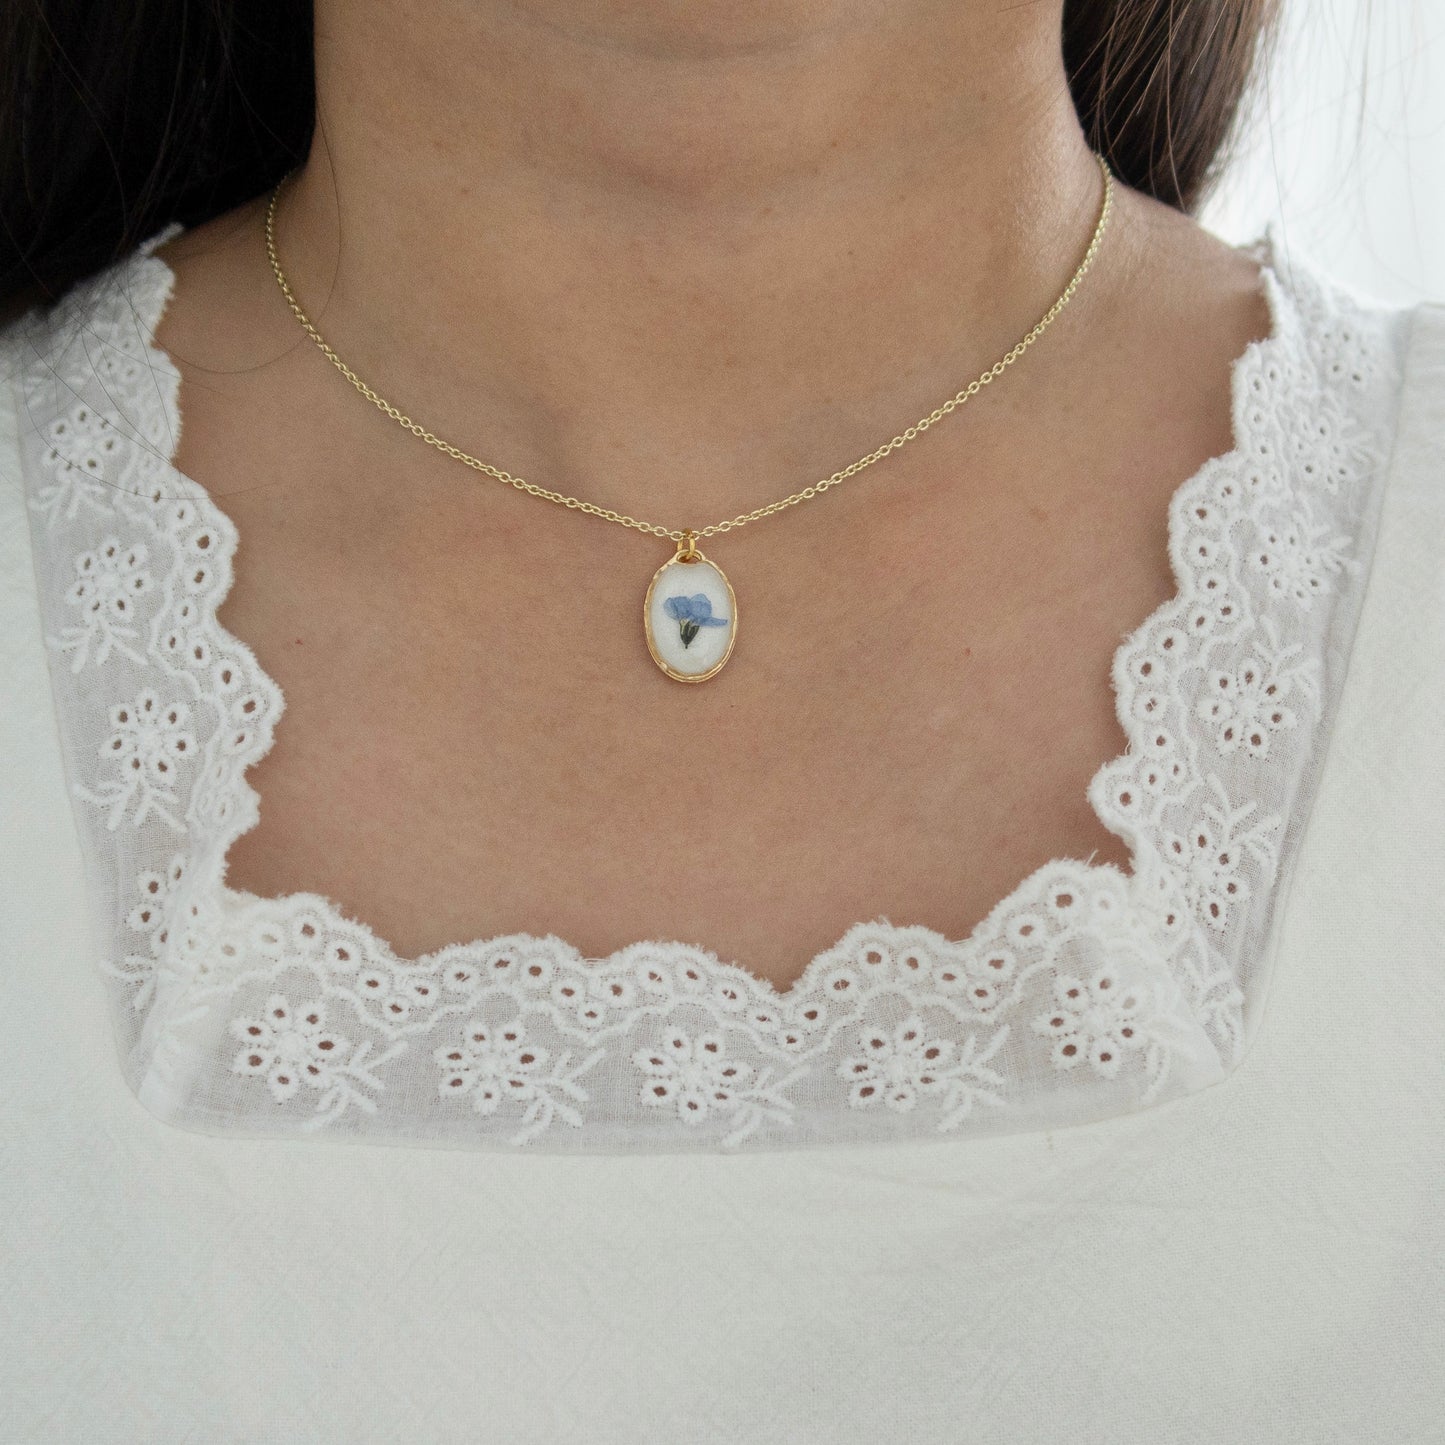 The Petit Forget Me Not Necklace